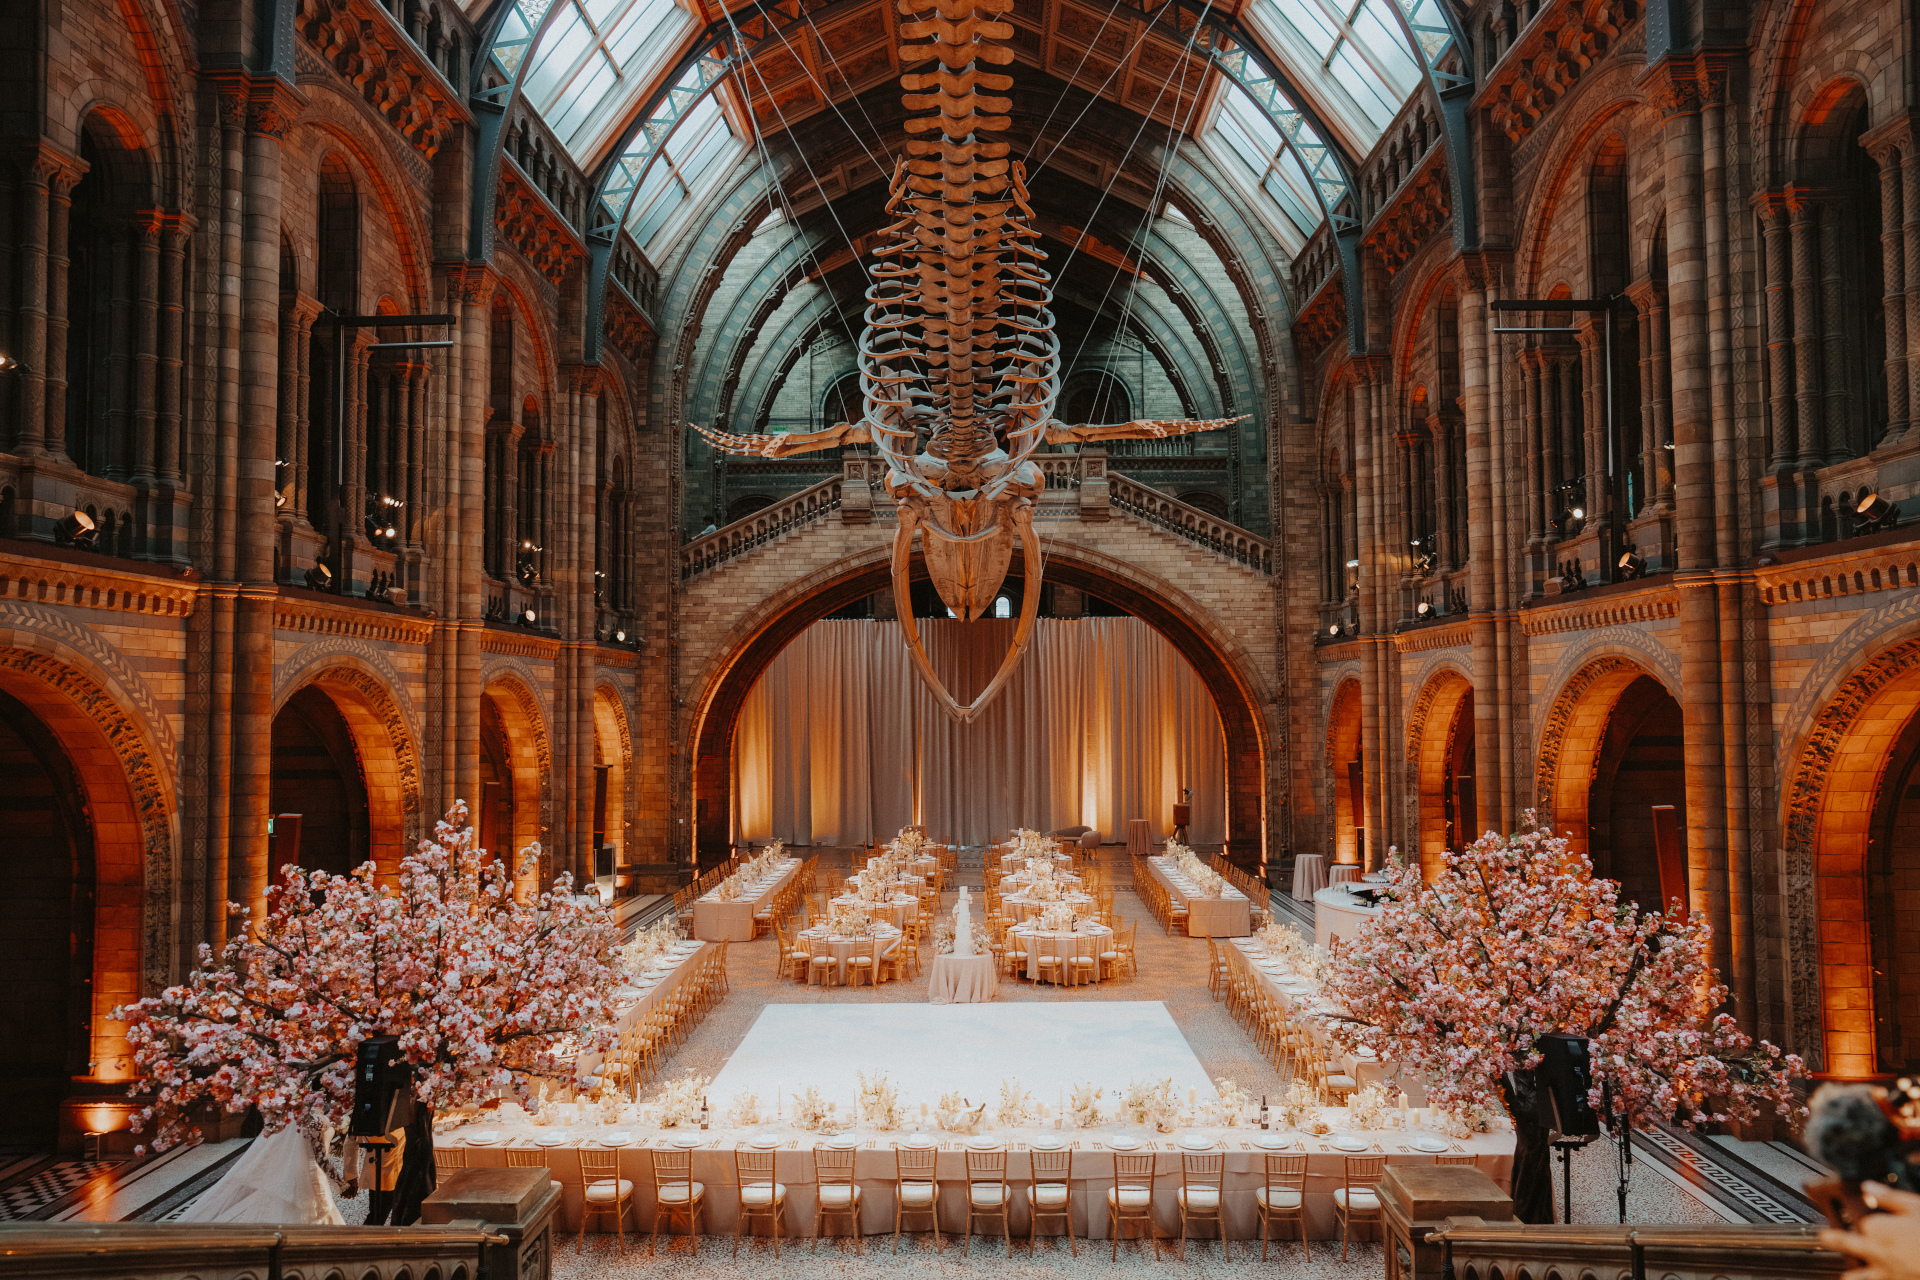 Looking For A Wedding Venue? This Couple Got Hitched In The Natural History Museum